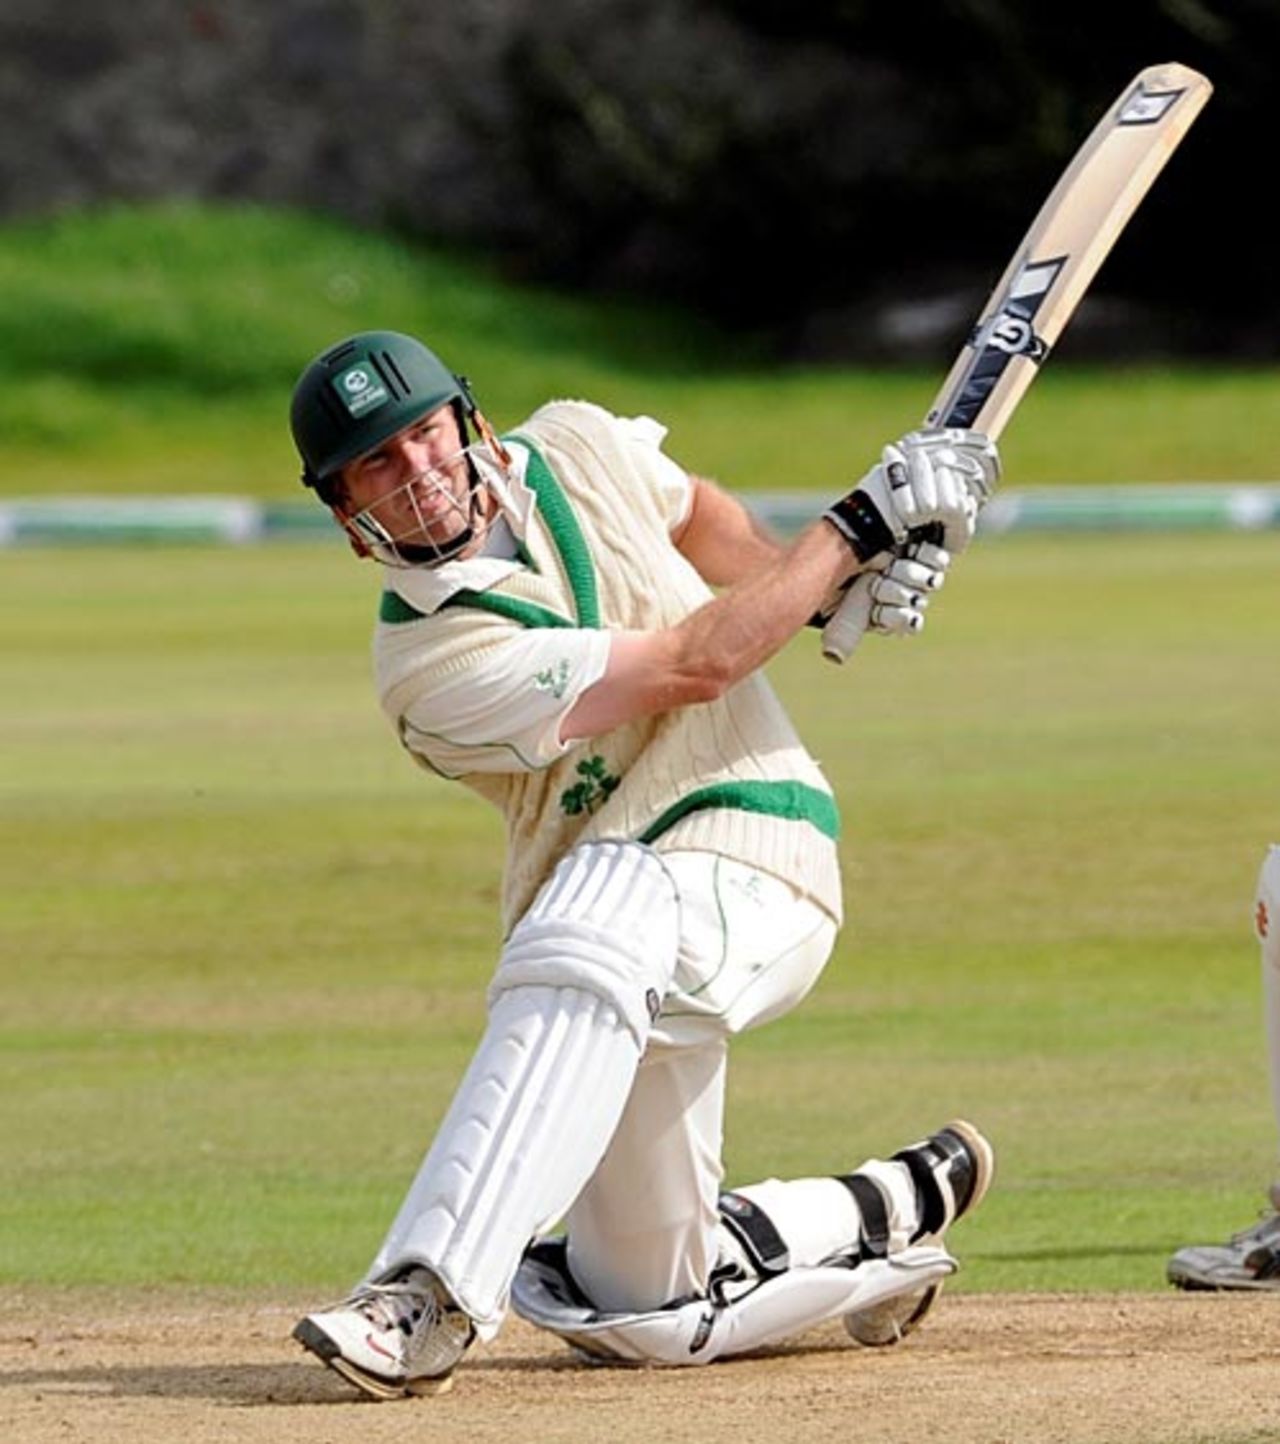 Andrew White hits out during his 55, Scotland v Ireland, ICC Intercontinental Cup, 3rd day, Aberdeen, August 19, 2009